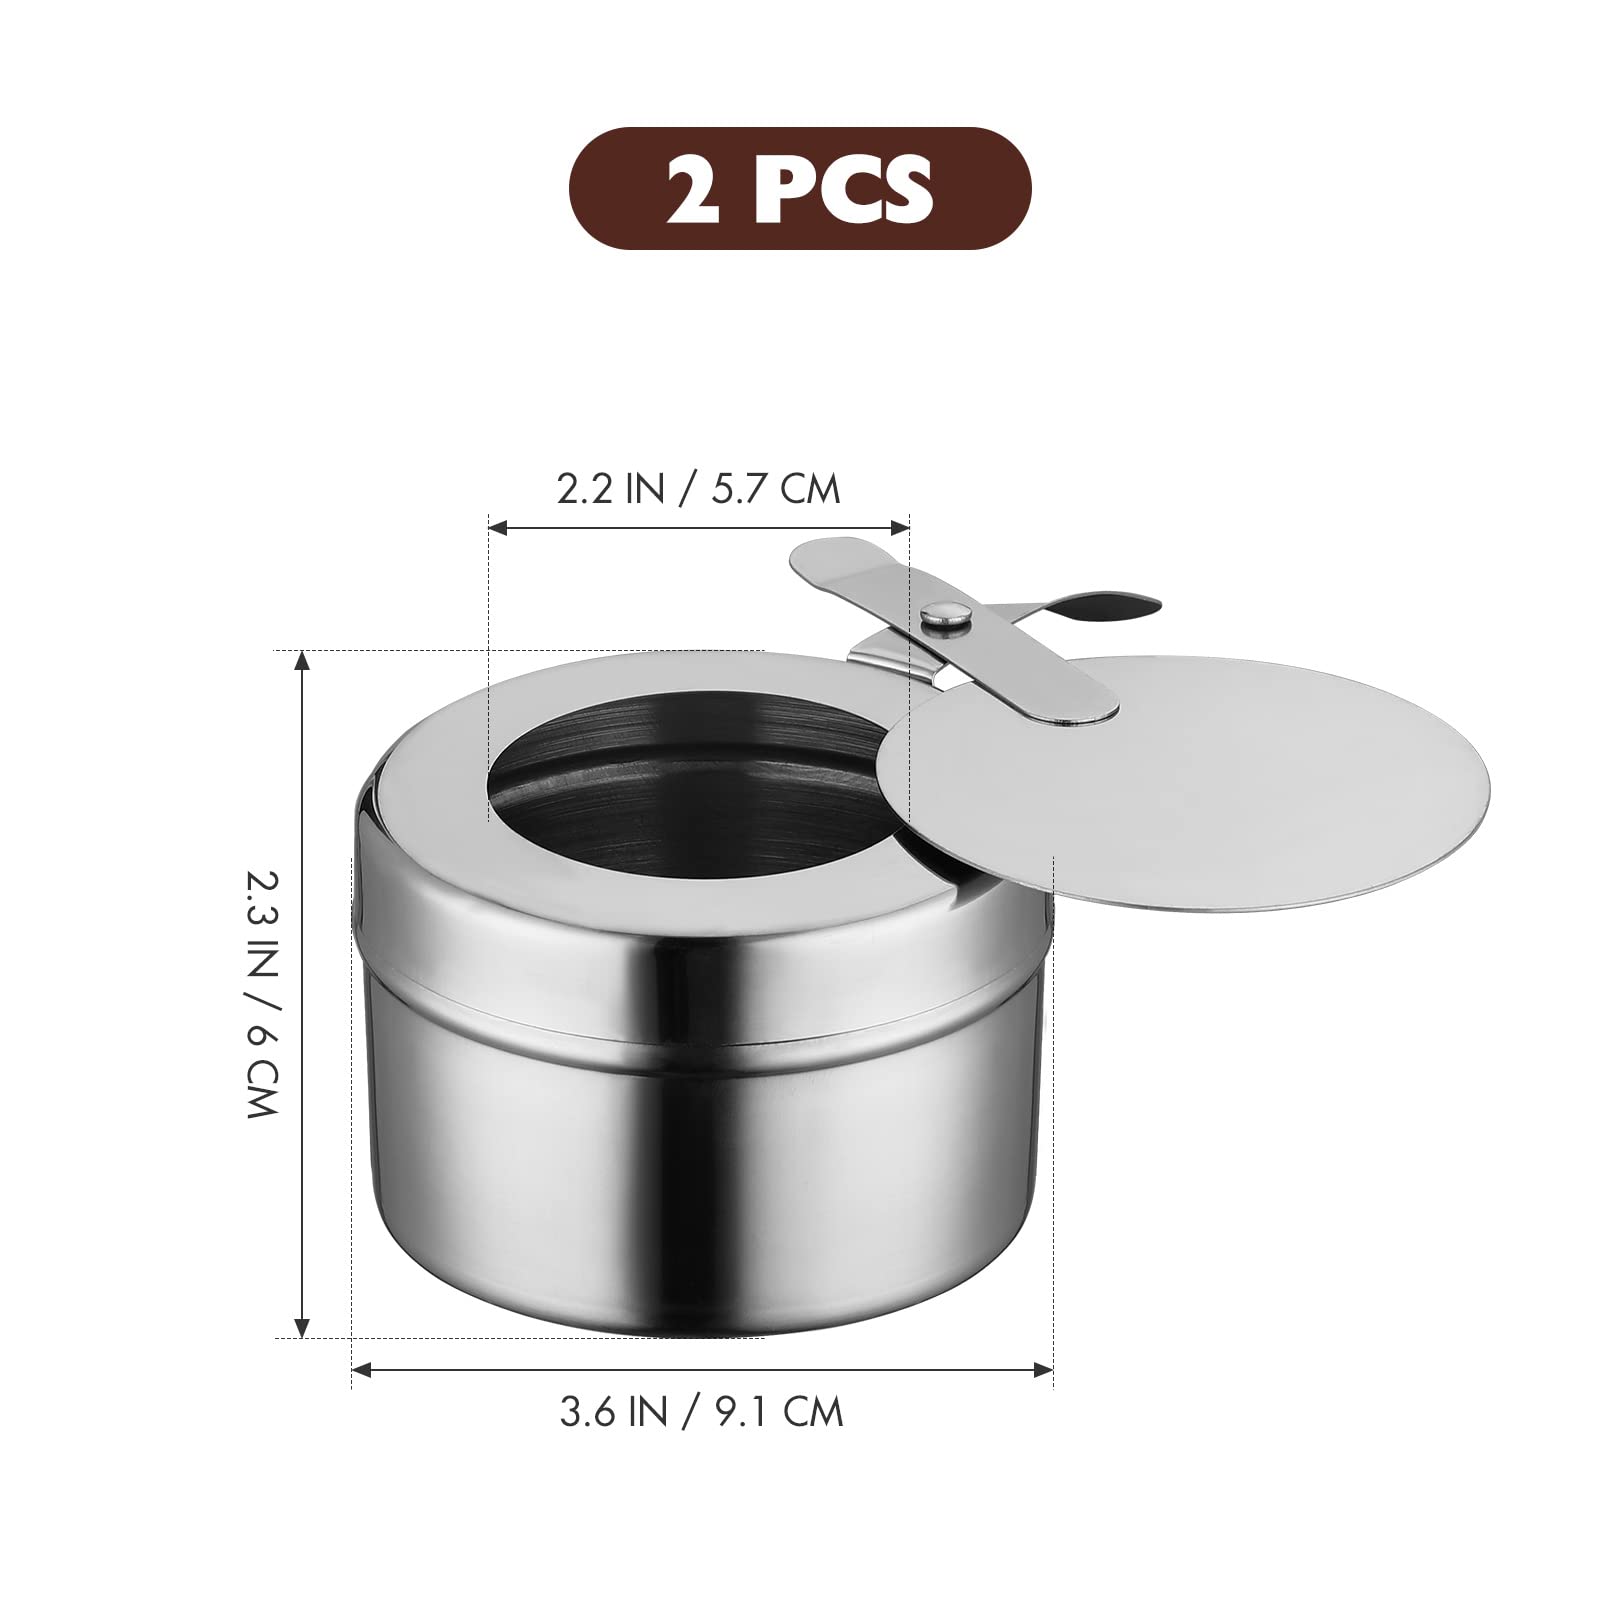 Kichvoe 2pcs Stainless Steel Chafer Wick Fuel Holder Canned Heat Holder Chaffing Dishes Replacement for Buffets Catering Event